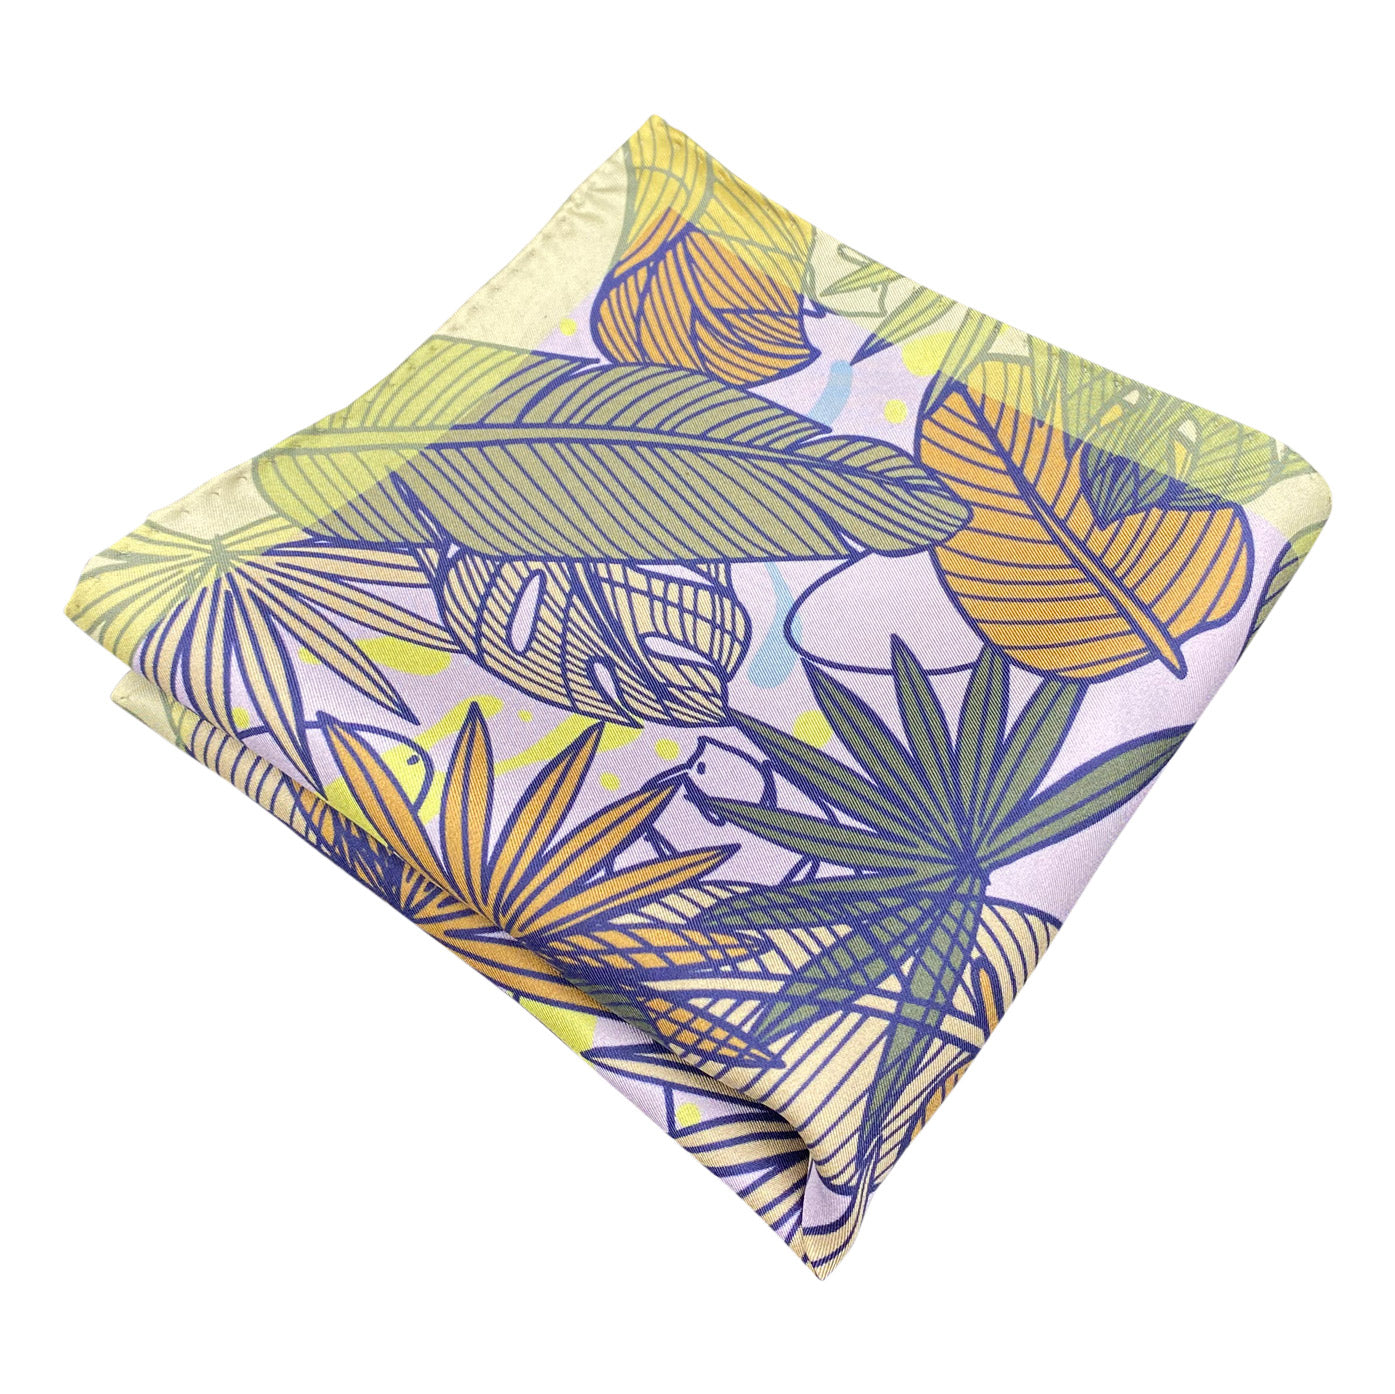 Folded 'Avon' silk pocket square from SOHO Scarves, showing the leaf montage pattern. Placed on a light background.